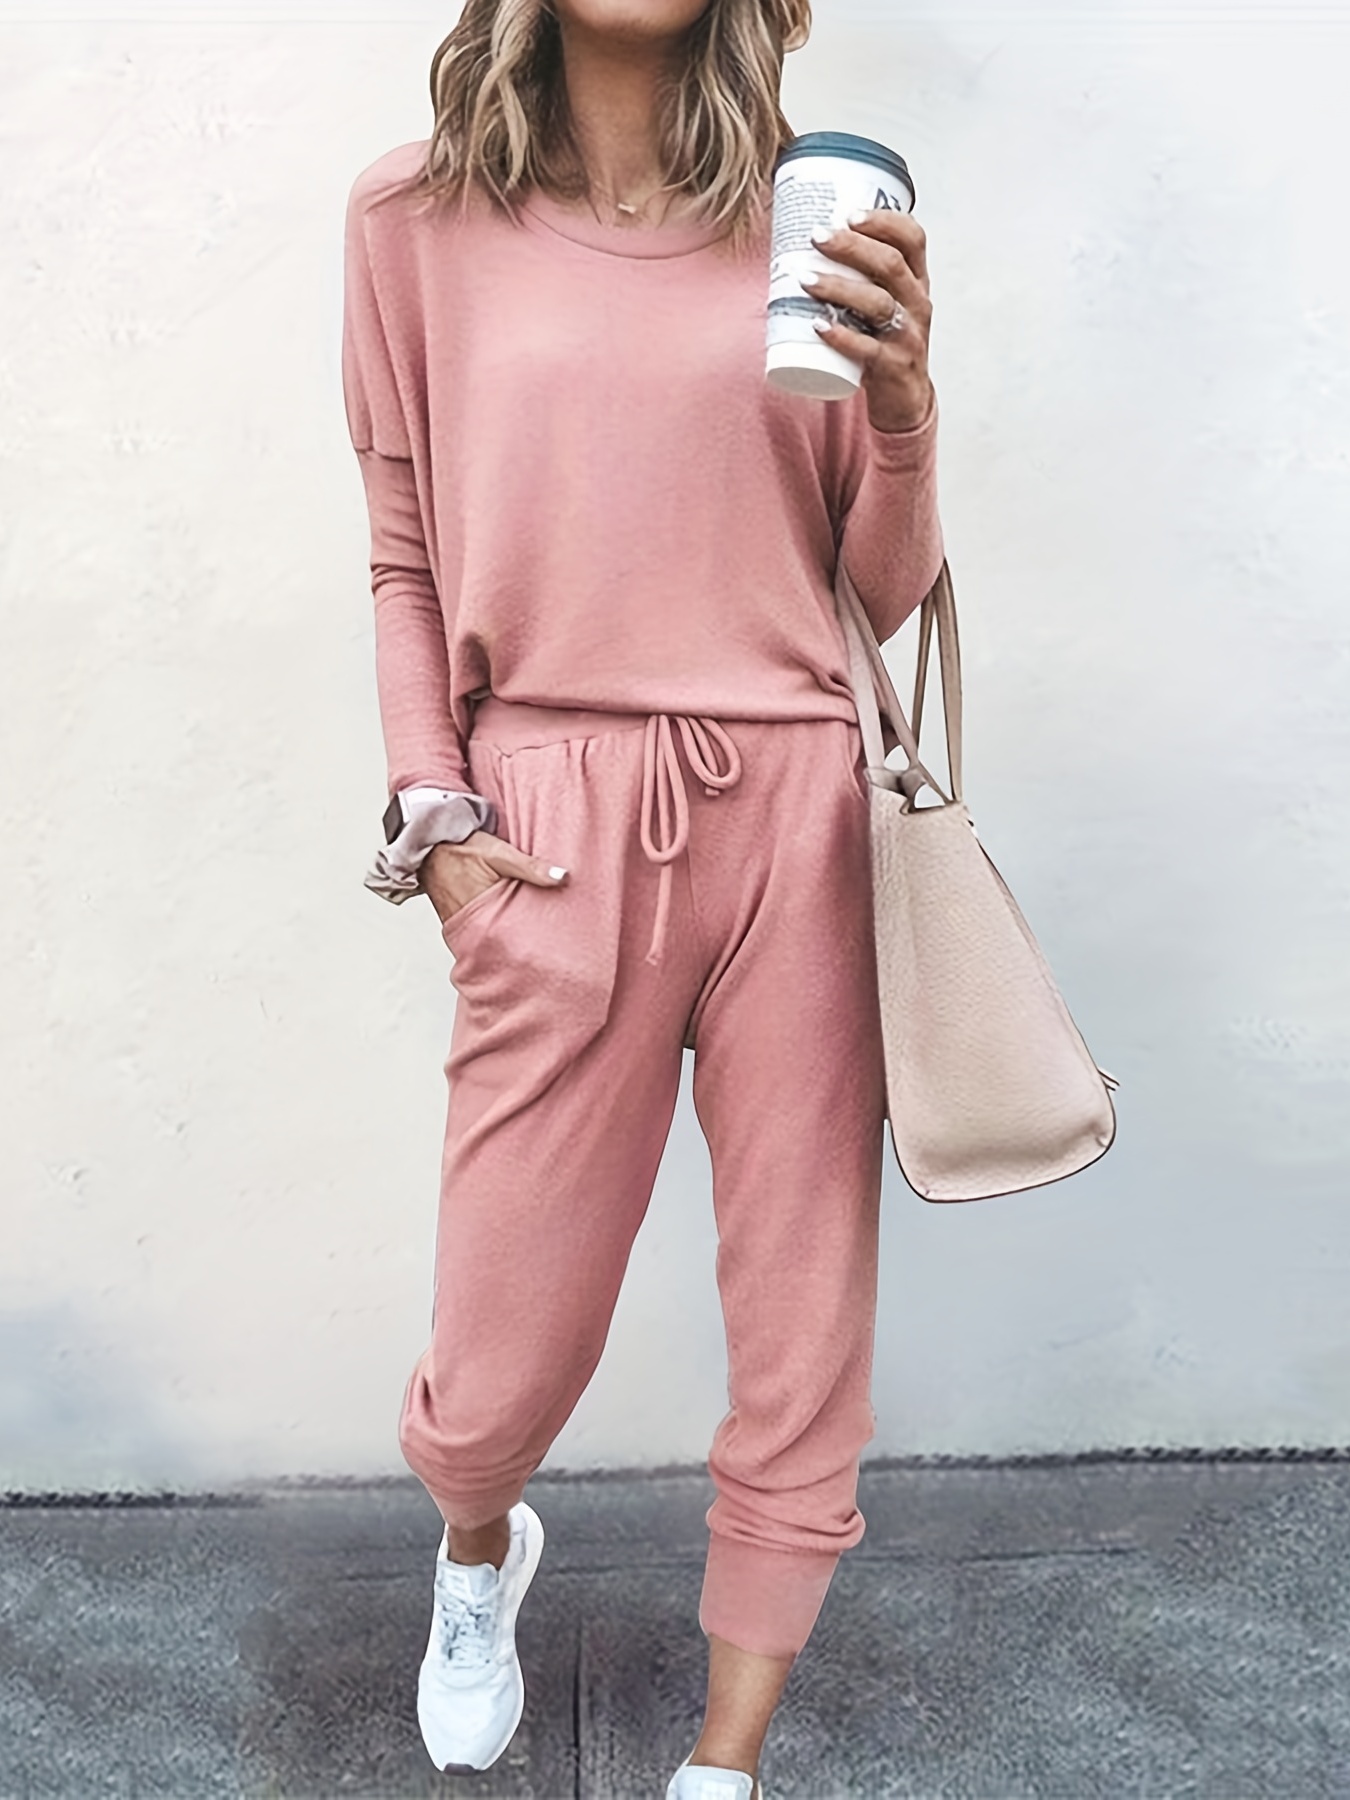 Soild Sporty Three 3 Piece Sets Outfits Women Long Sleeve+Slim Leggings  High Waist Pants Pink Matching Outfits Casual Streetwear